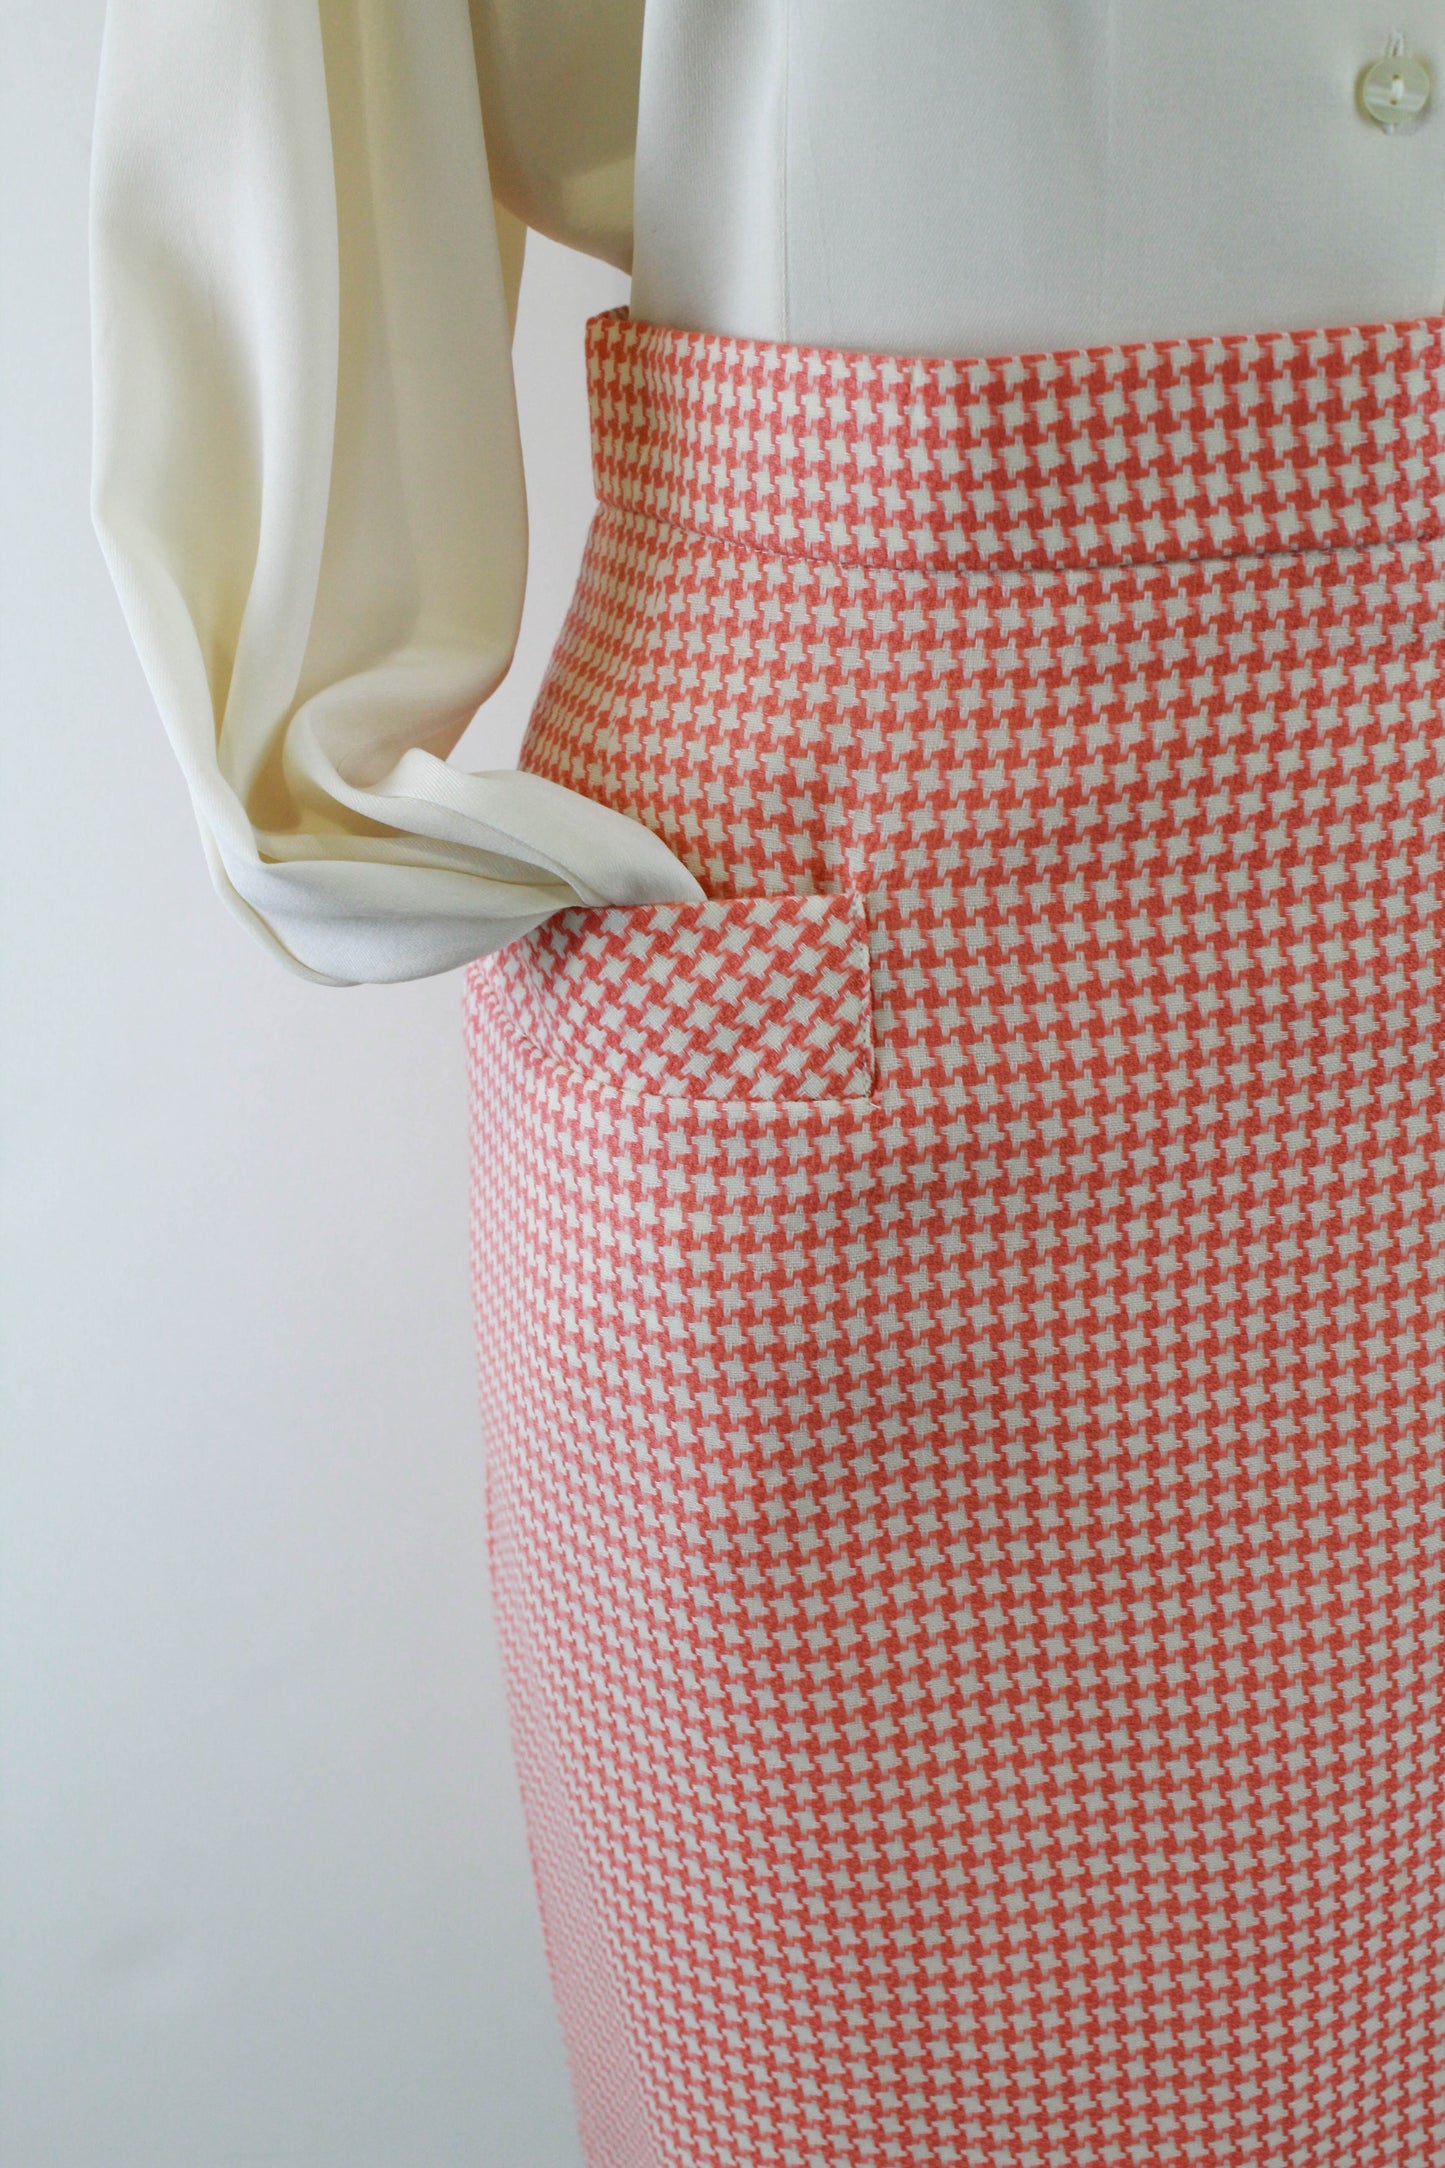 1990s Karl Lagerfeld Peach Pink Houndstooth Skirt Suit